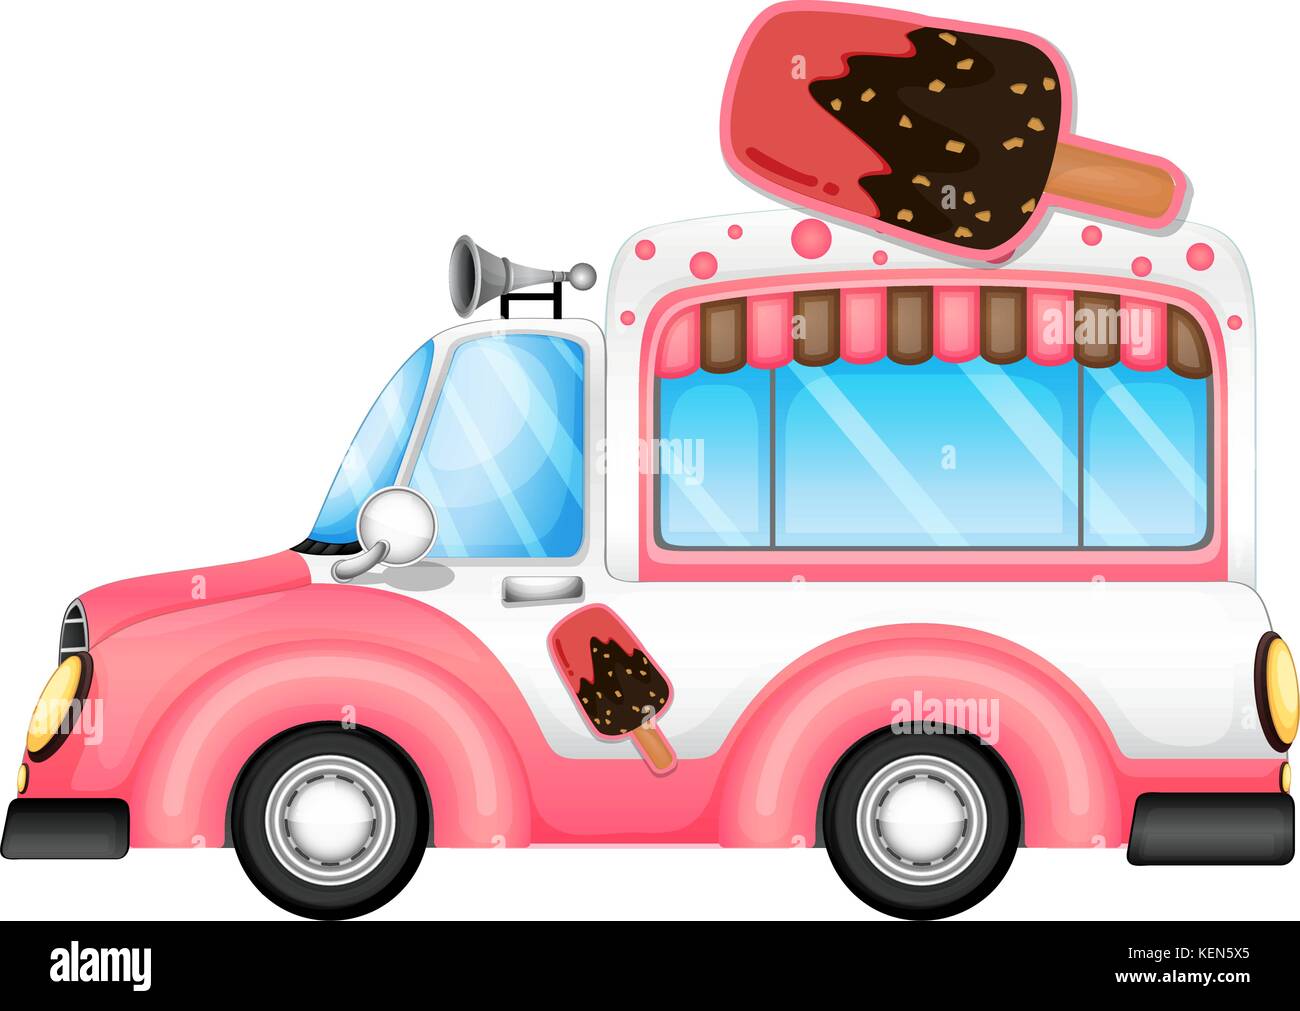 Illustration of a pink car selling icecream on a white background Stock Vector